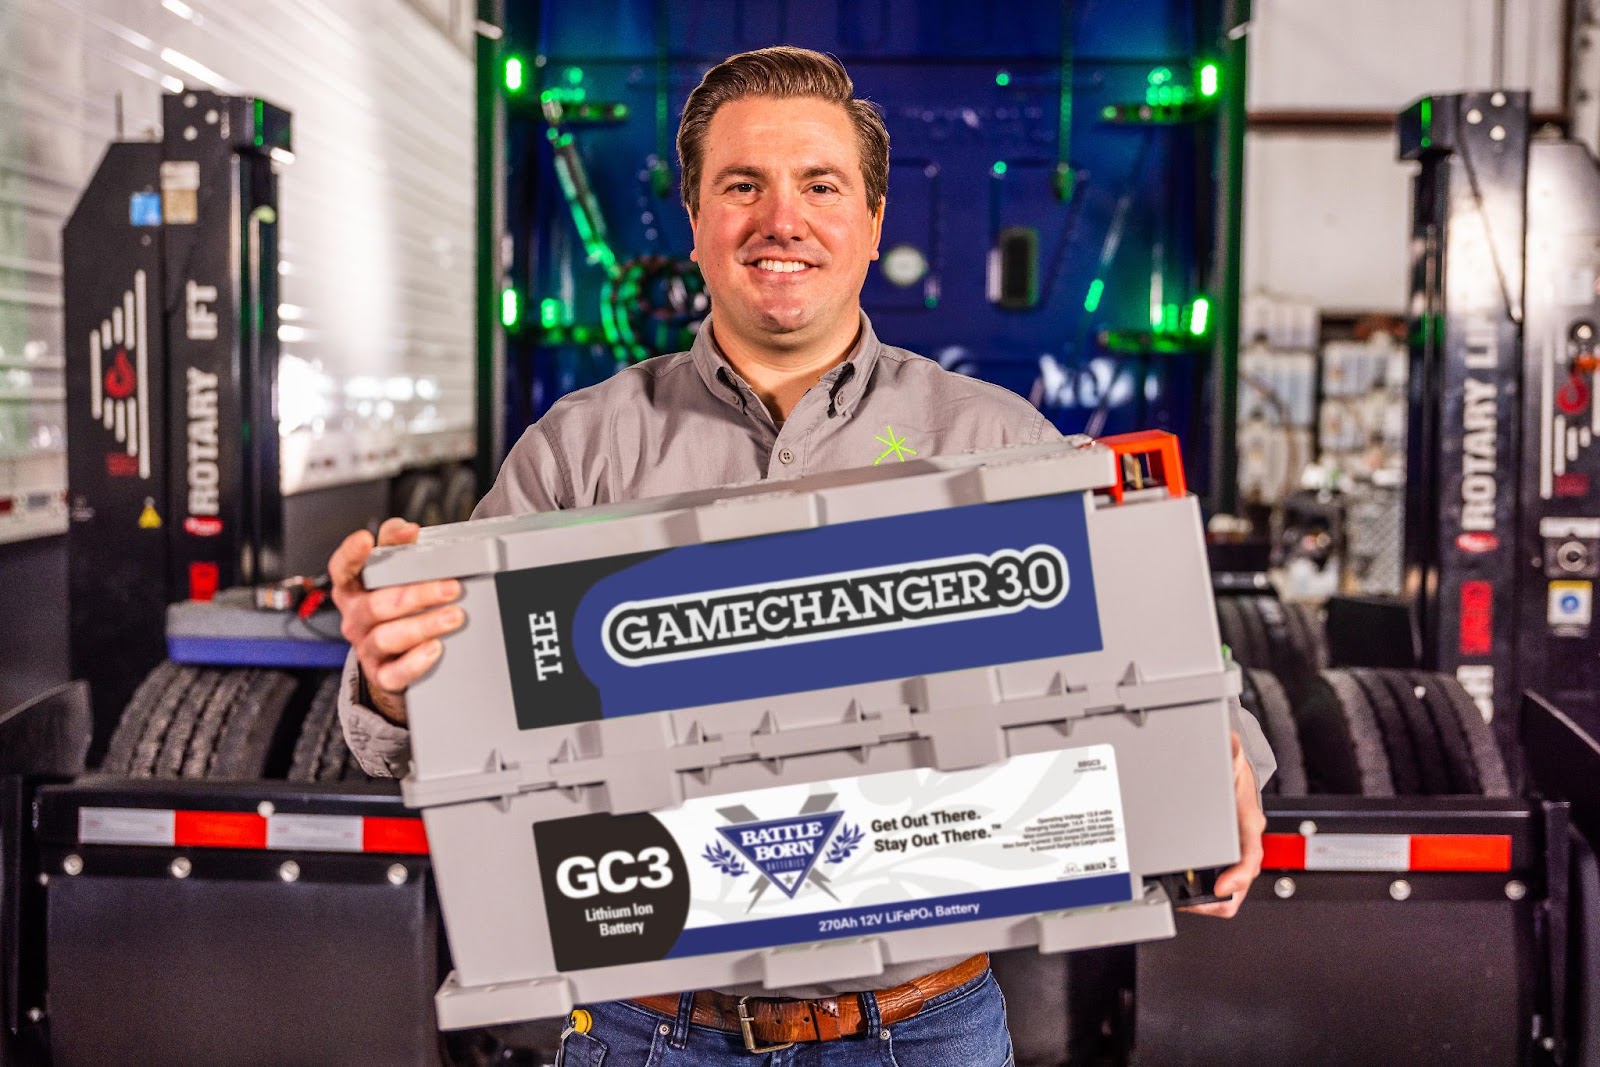 Trucking expert, DJ Hasler standing in front of a semi truck smiling and holding a Battle Born GC3 battery.